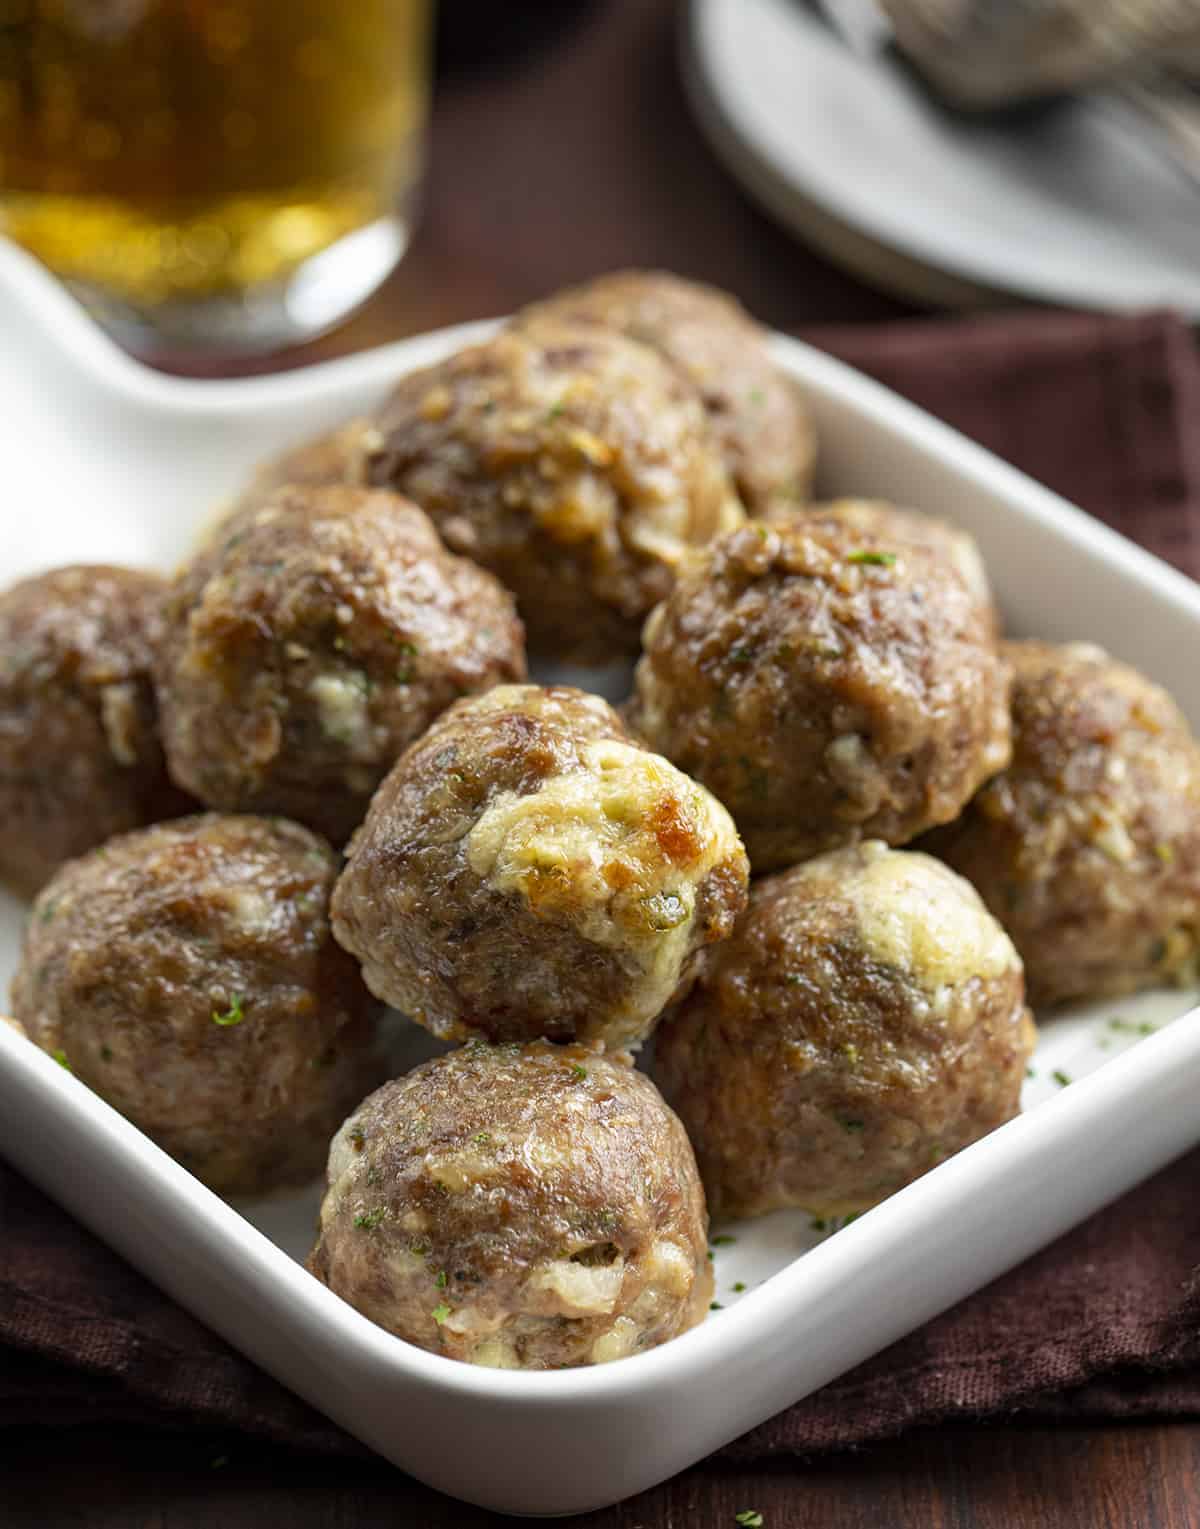 Pan of Jalapeno Popper Stuffed Meatballs with Beer in the Background